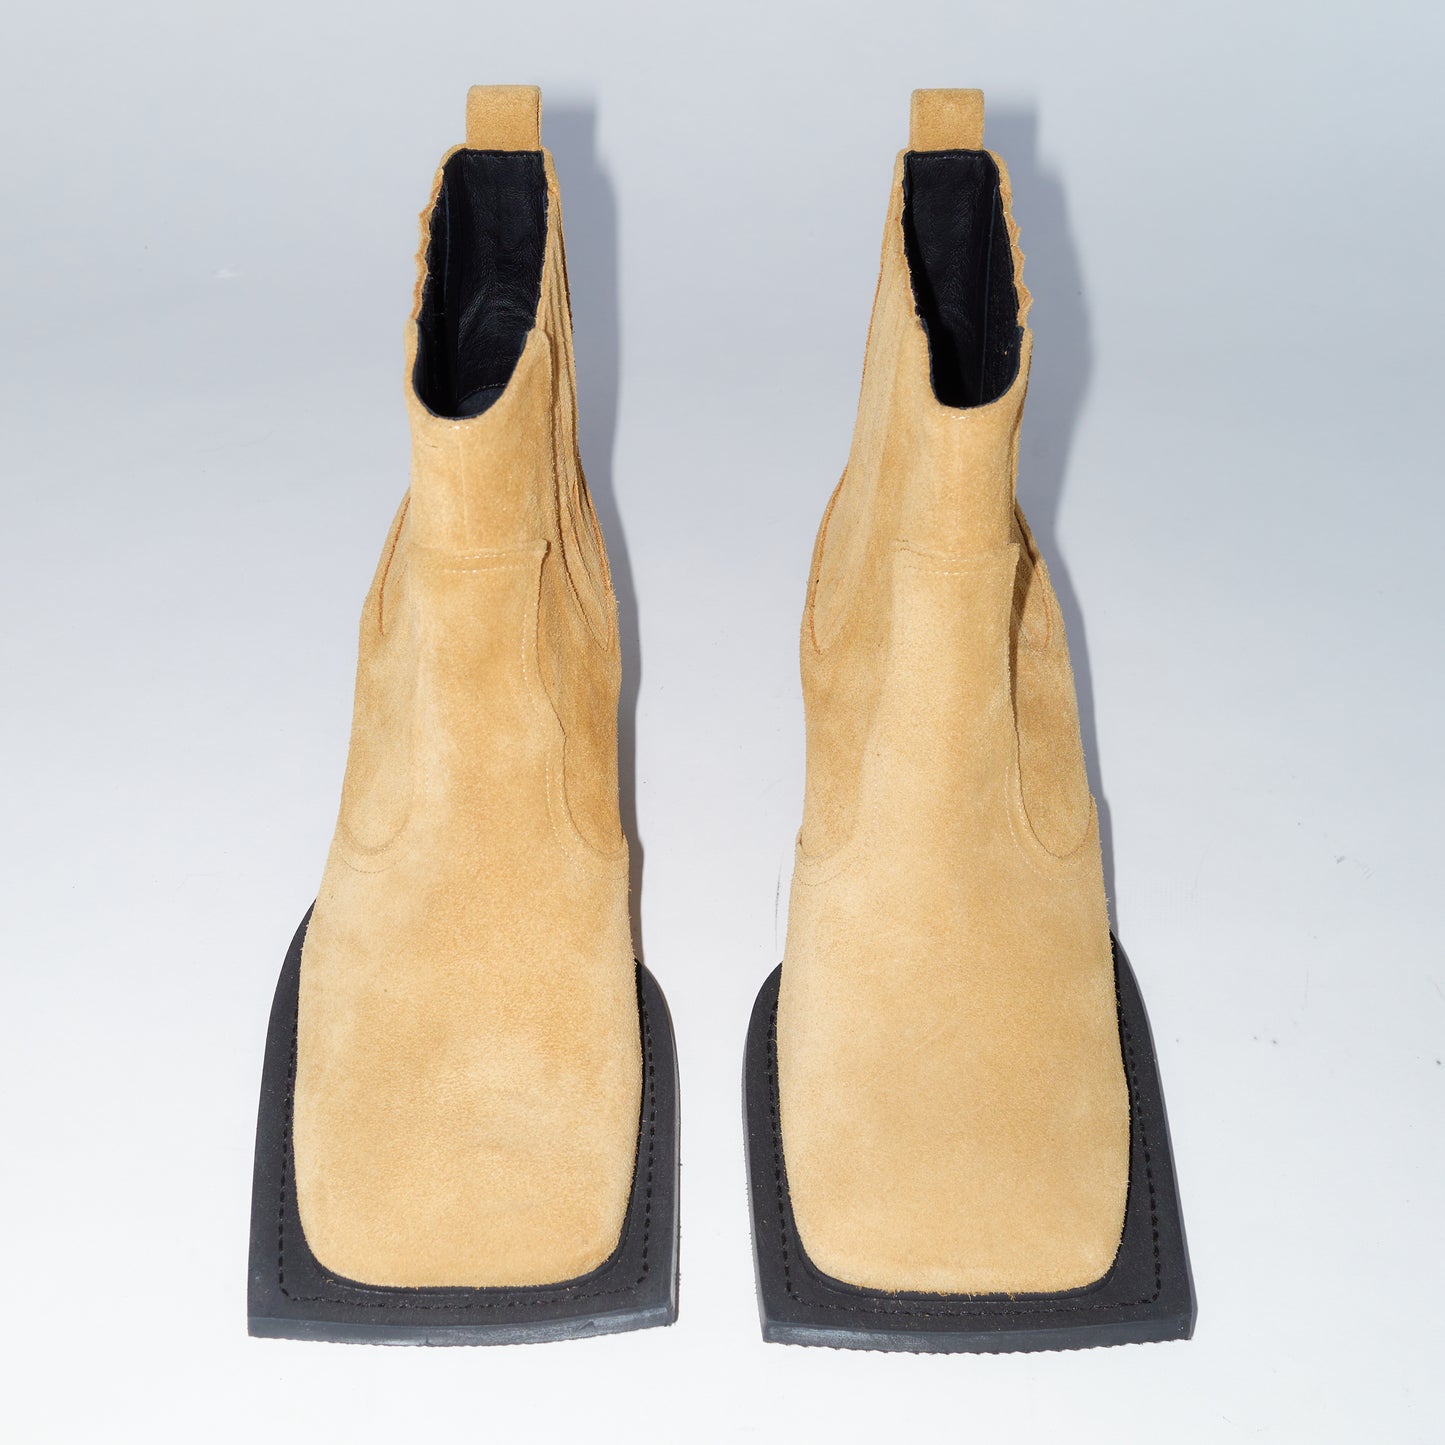 Howler Ankle Boots in Suede Brown Leather